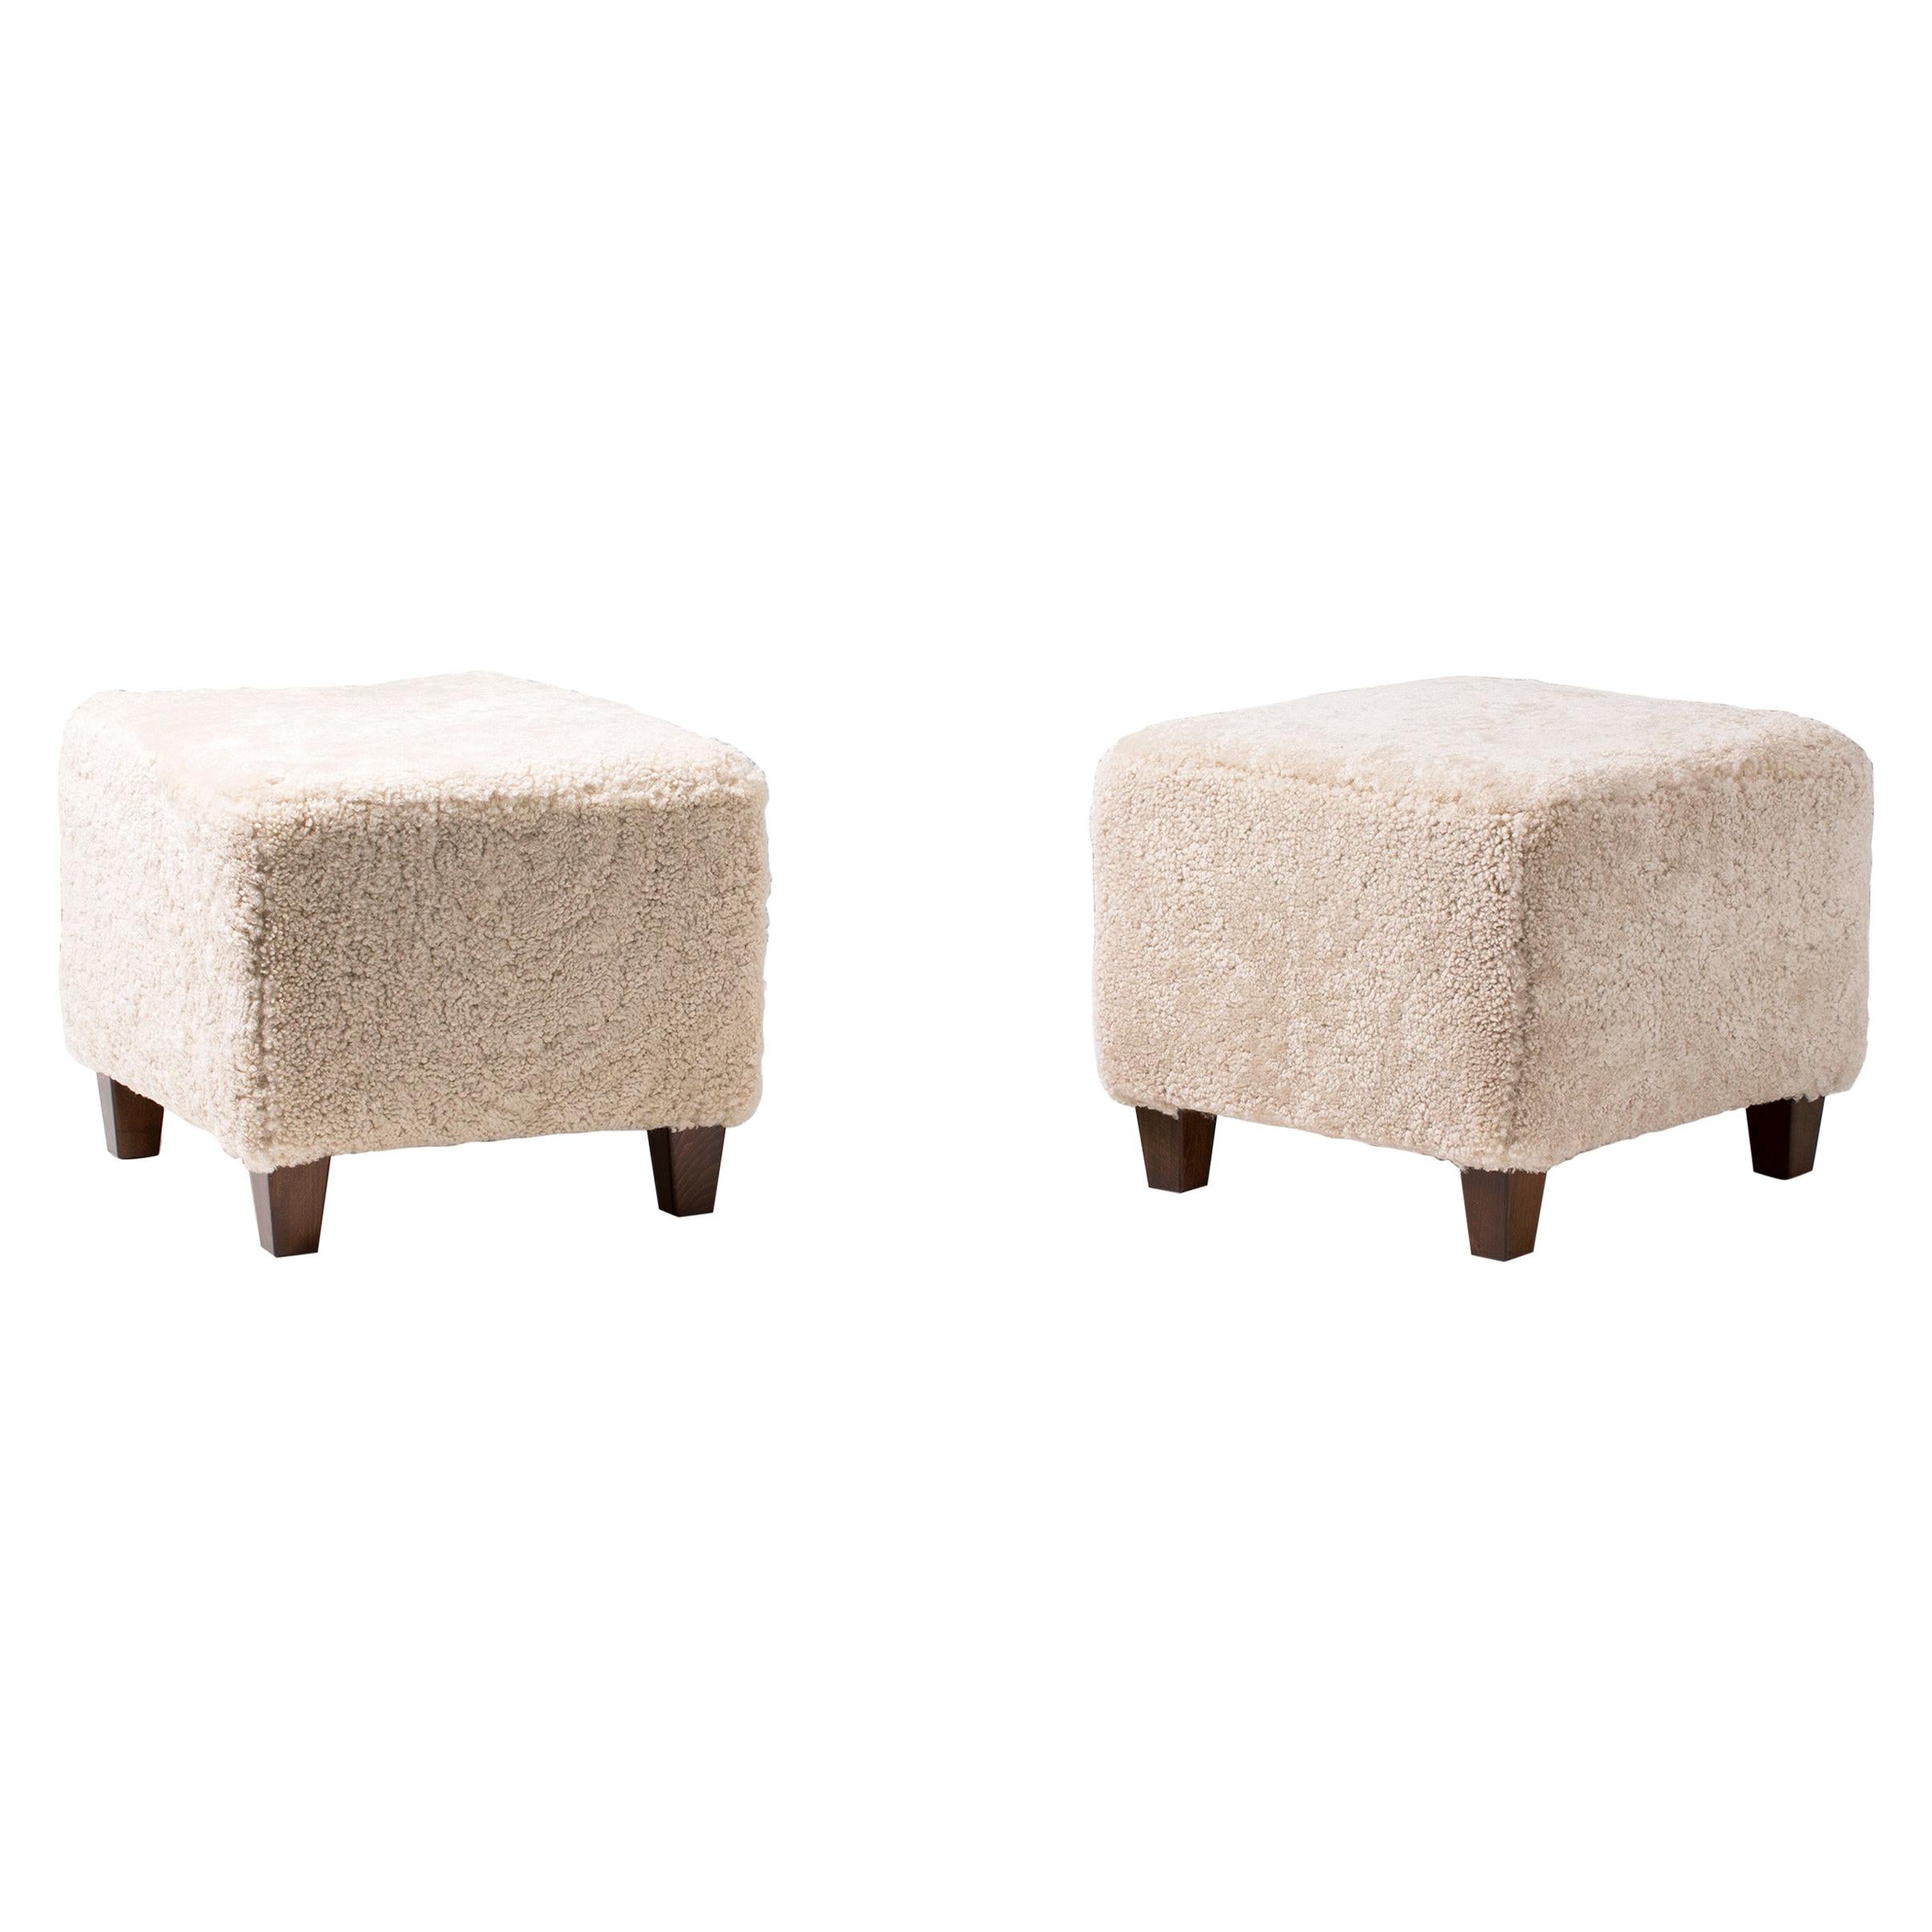 Pair of Custom Made Shearling Ottomans